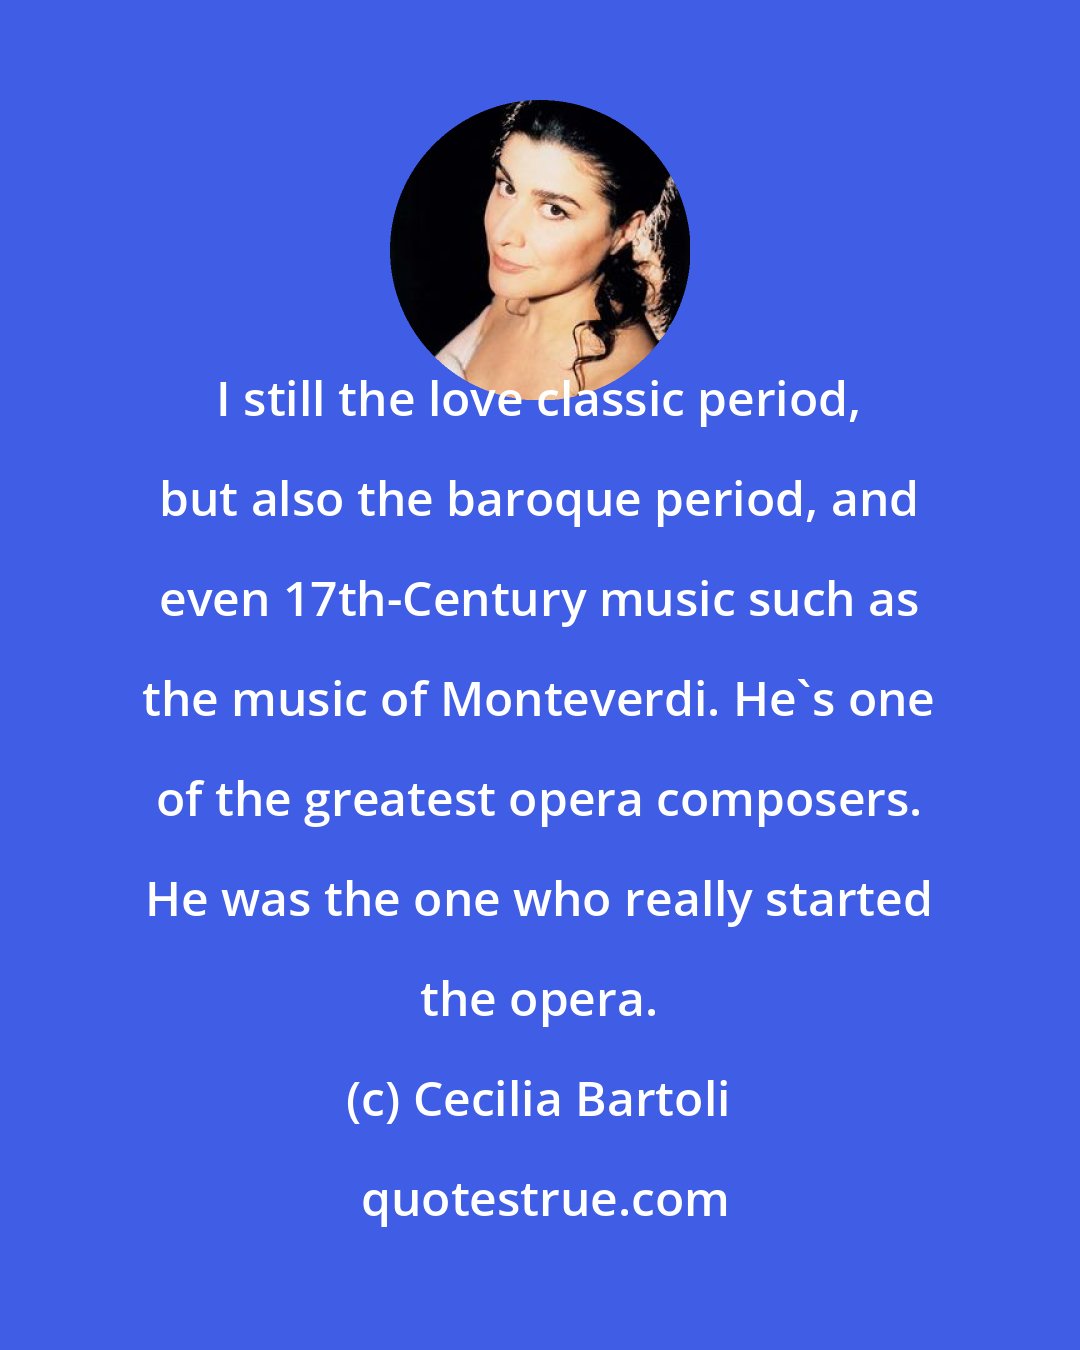 Cecilia Bartoli: I still the love classic period, but also the baroque period, and even 17th-Century music such as the music of Monteverdi. He's one of the greatest opera composers. He was the one who really started the opera.